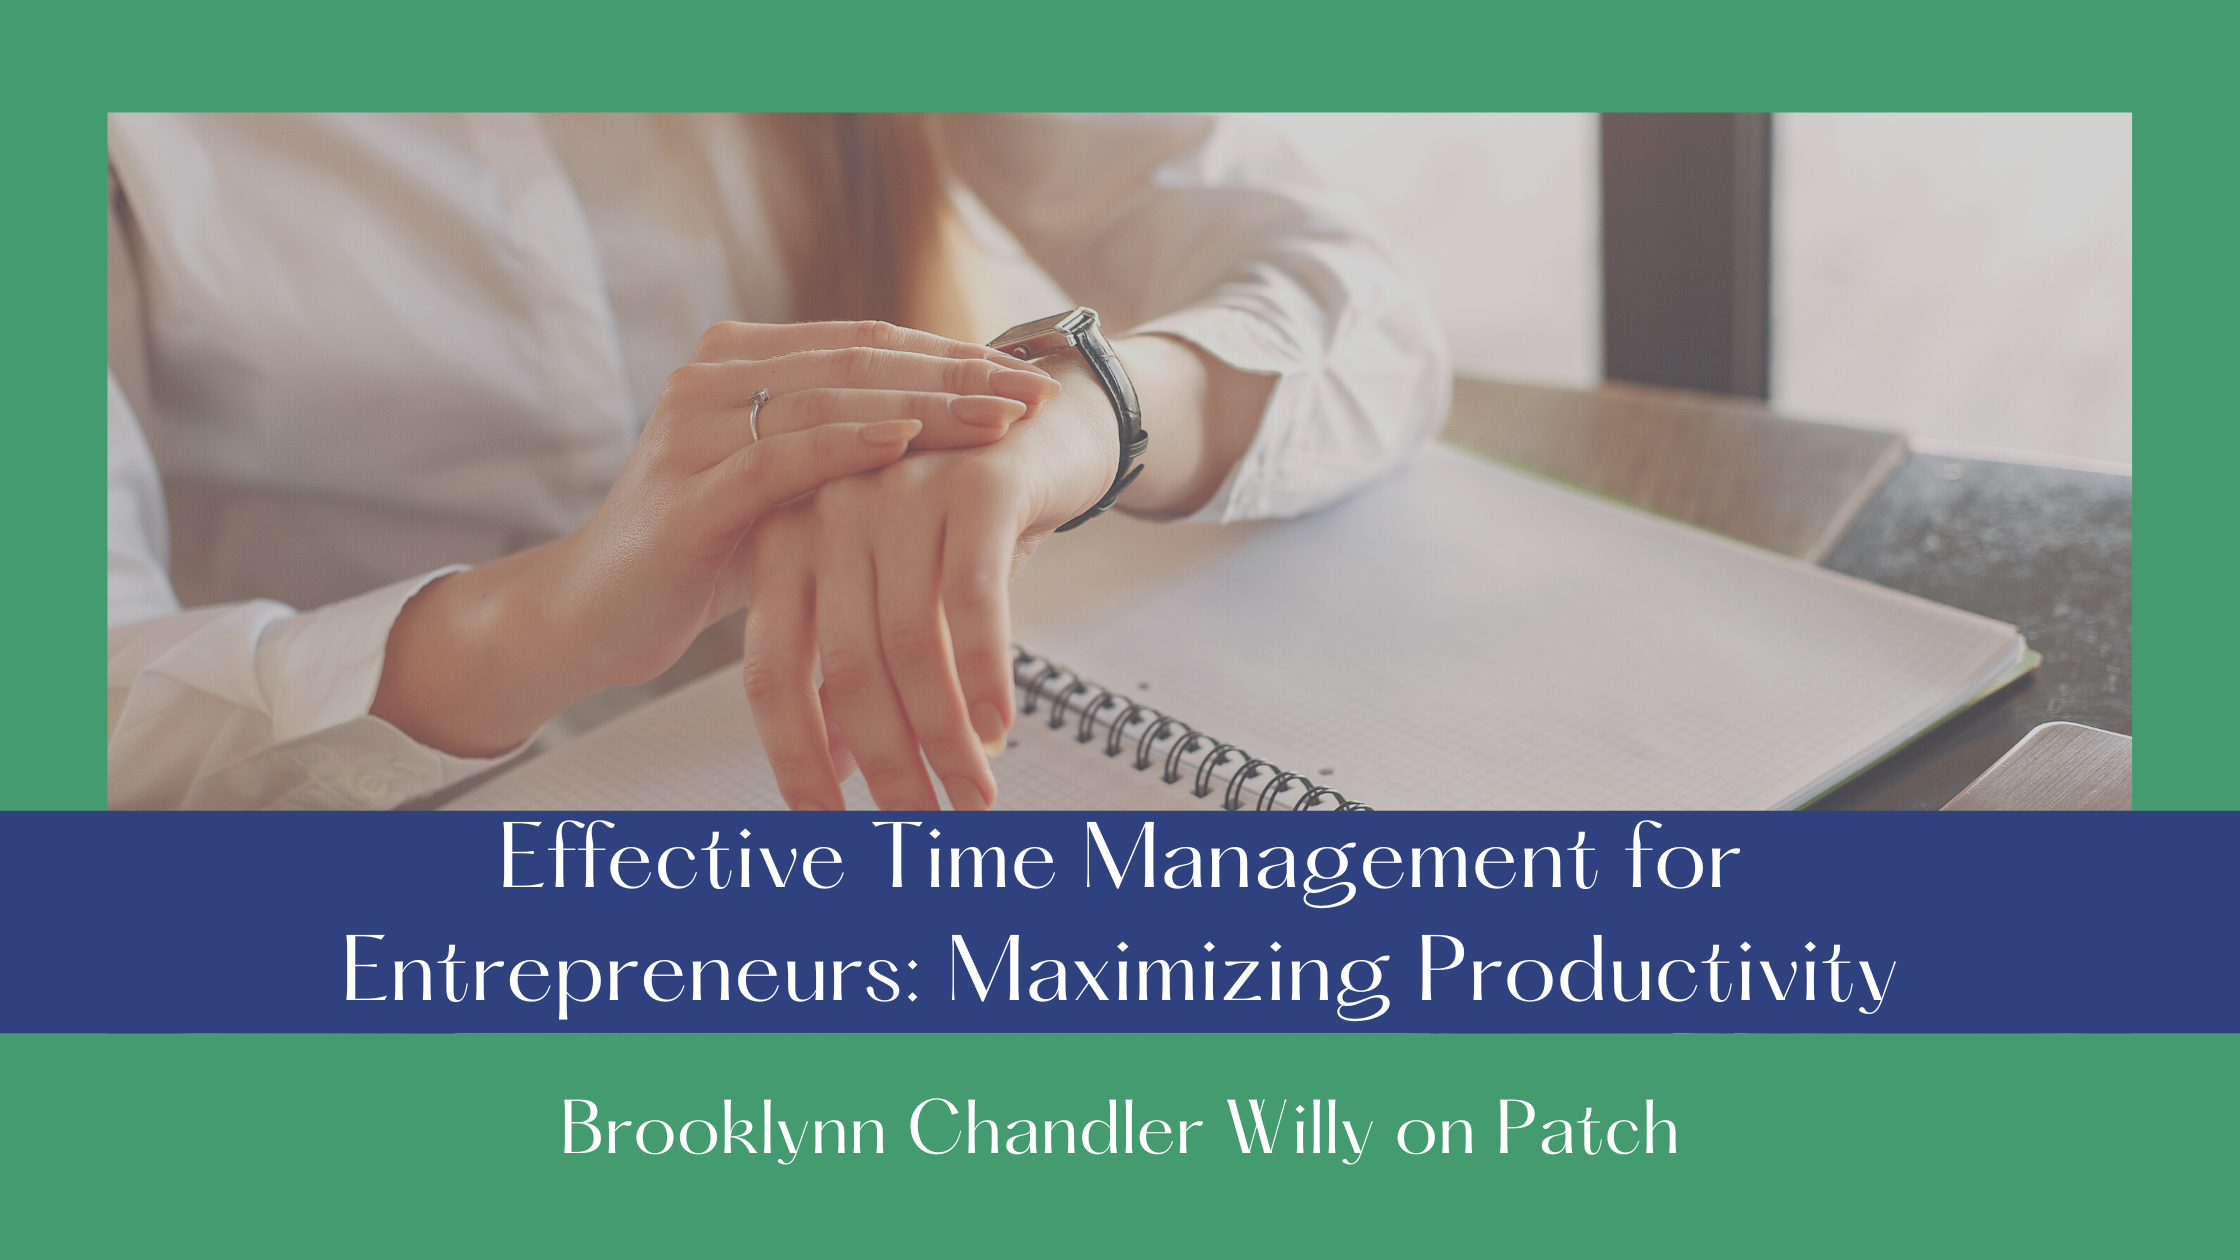 I -ntreprencurs: Maximizing Productivity

Brooklvnn Chandler Willy on Patch